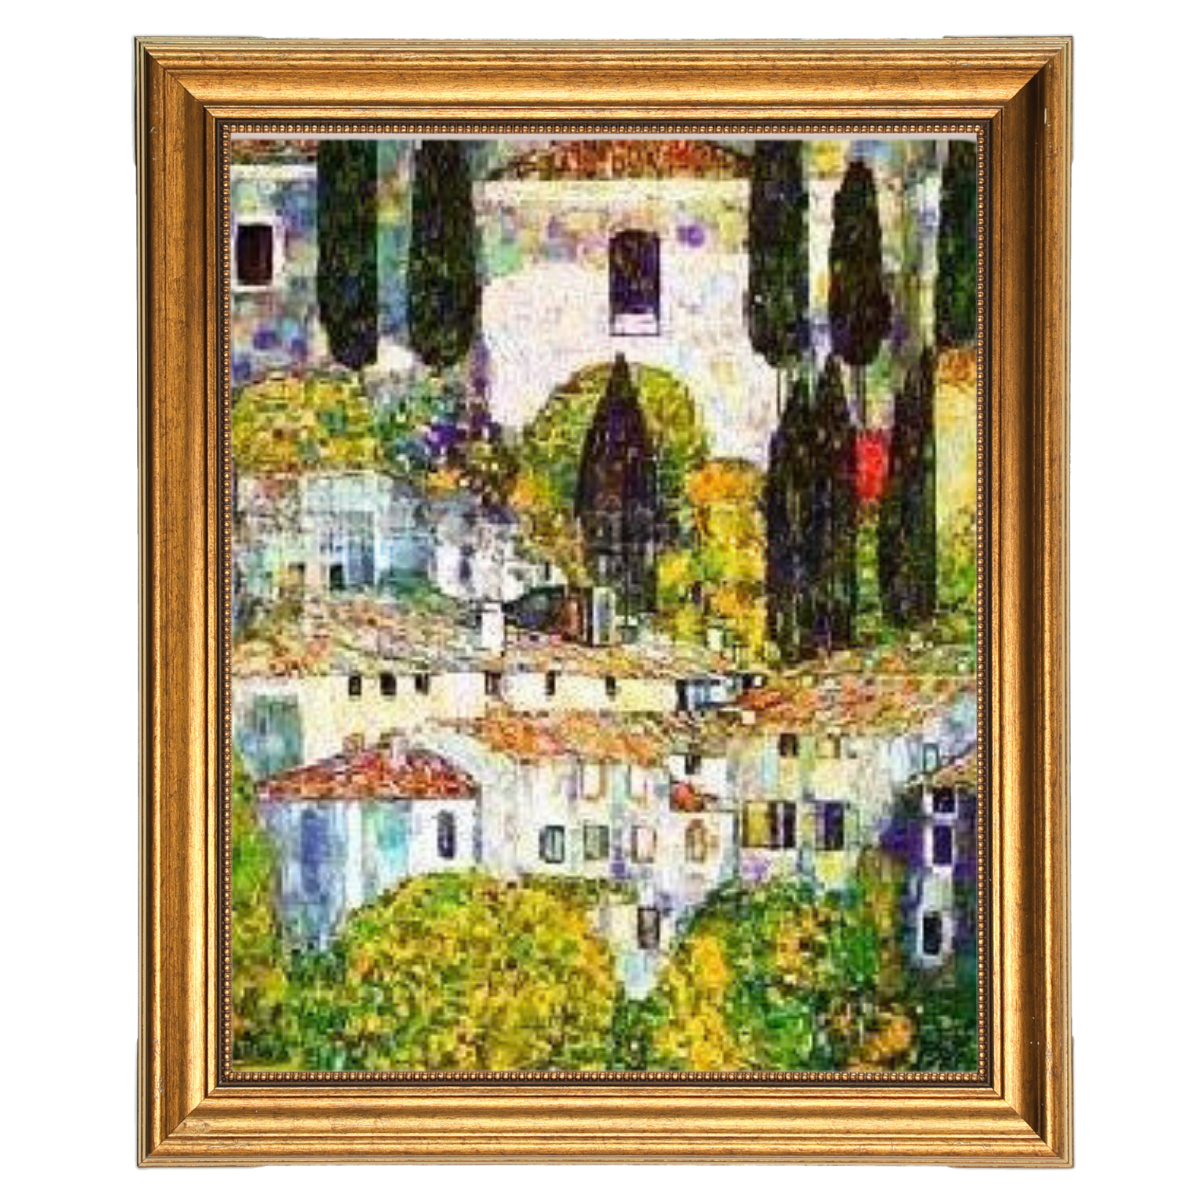 Chiesa a Cassone - Vintage Wall Art Prints Decor For Living Room